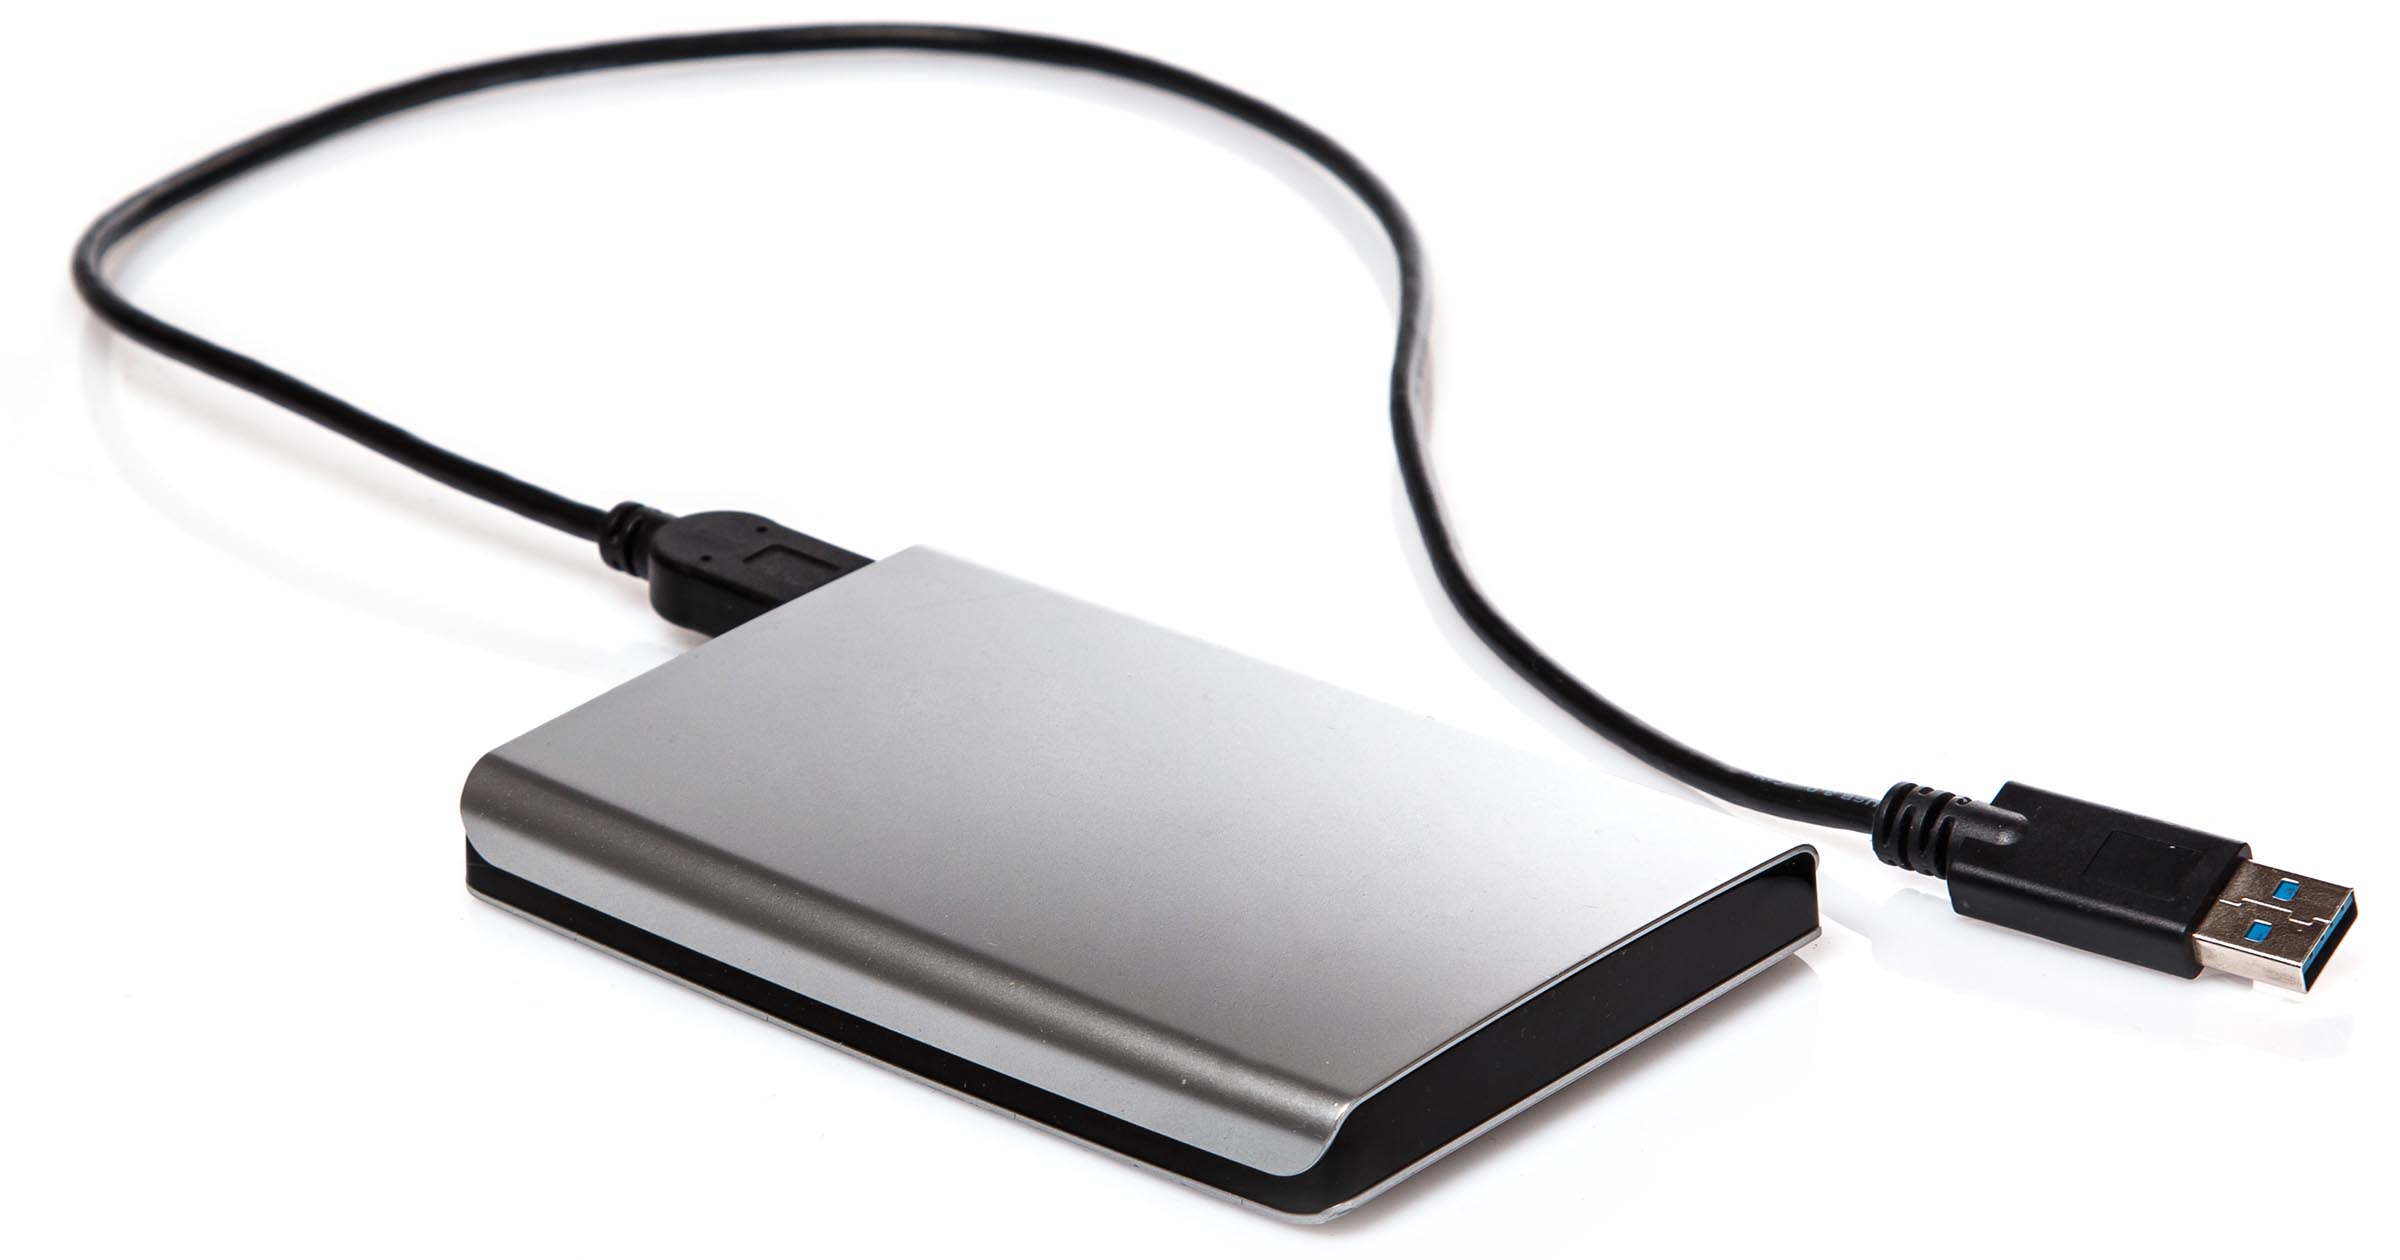 most recommeneded external hard drive for pc